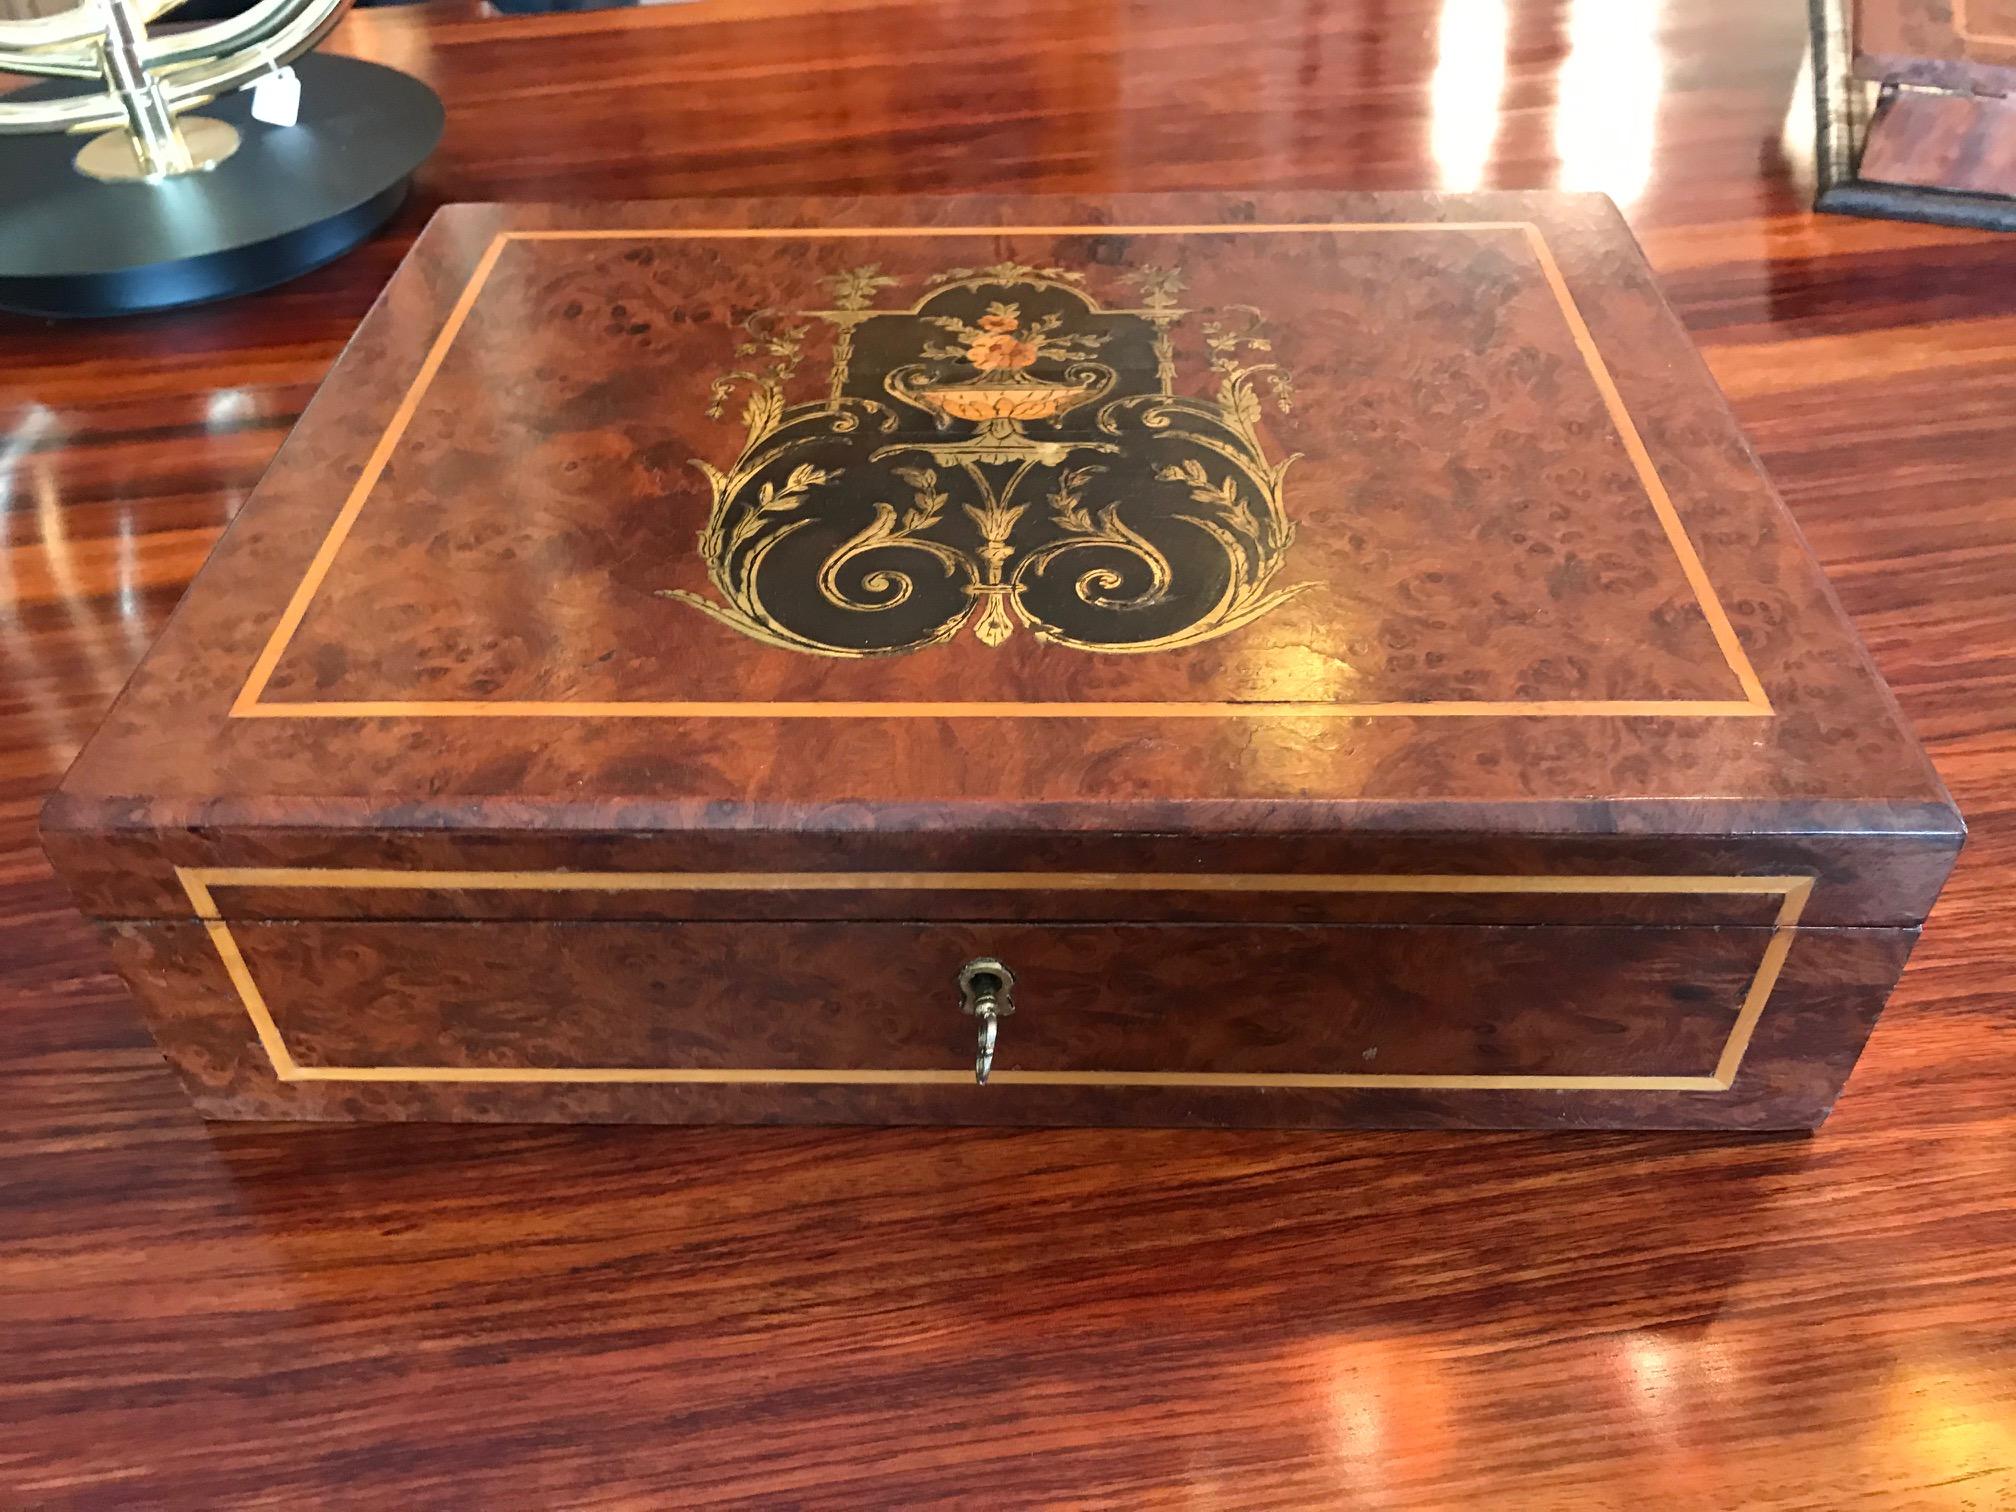 Very nice 19th century French Napoleon III walnut and gilded brass marquetry mail case from 1870s.
Brass marquetry representing a flower bouquet.
Original key. Beautiful quality.
 